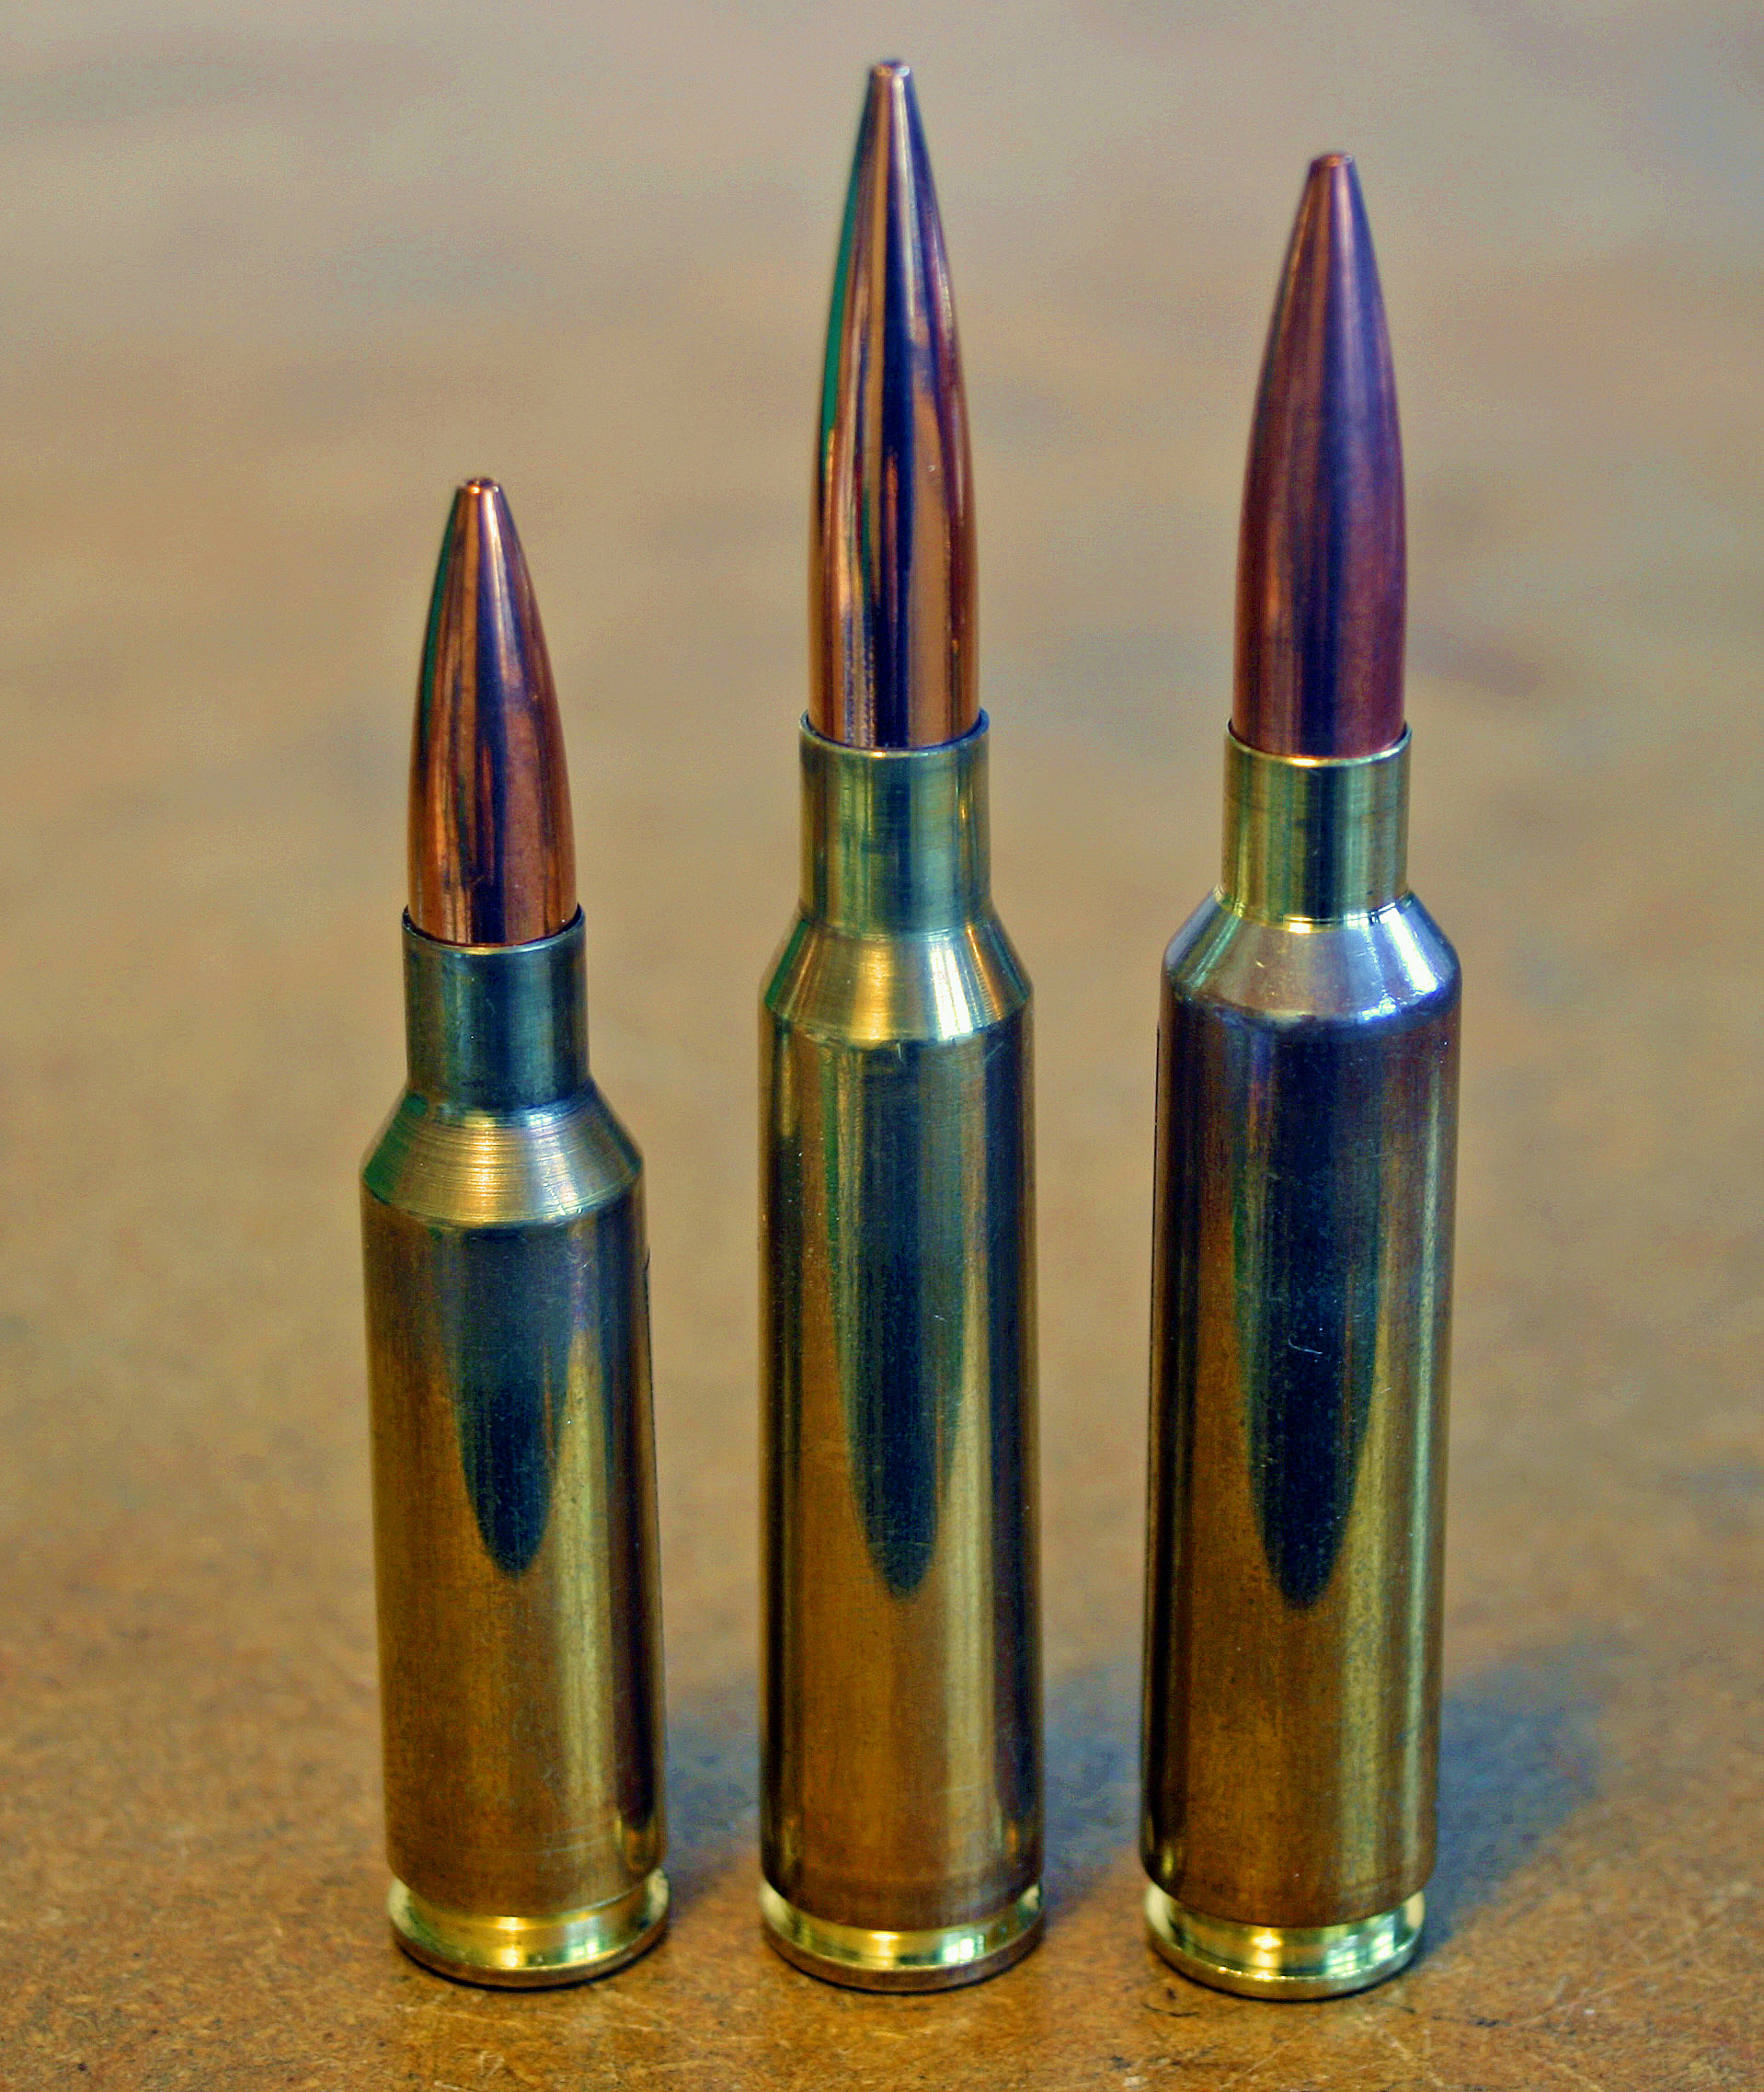 6.5X47L, 6.5X55, and 6.5-284 Norma. 